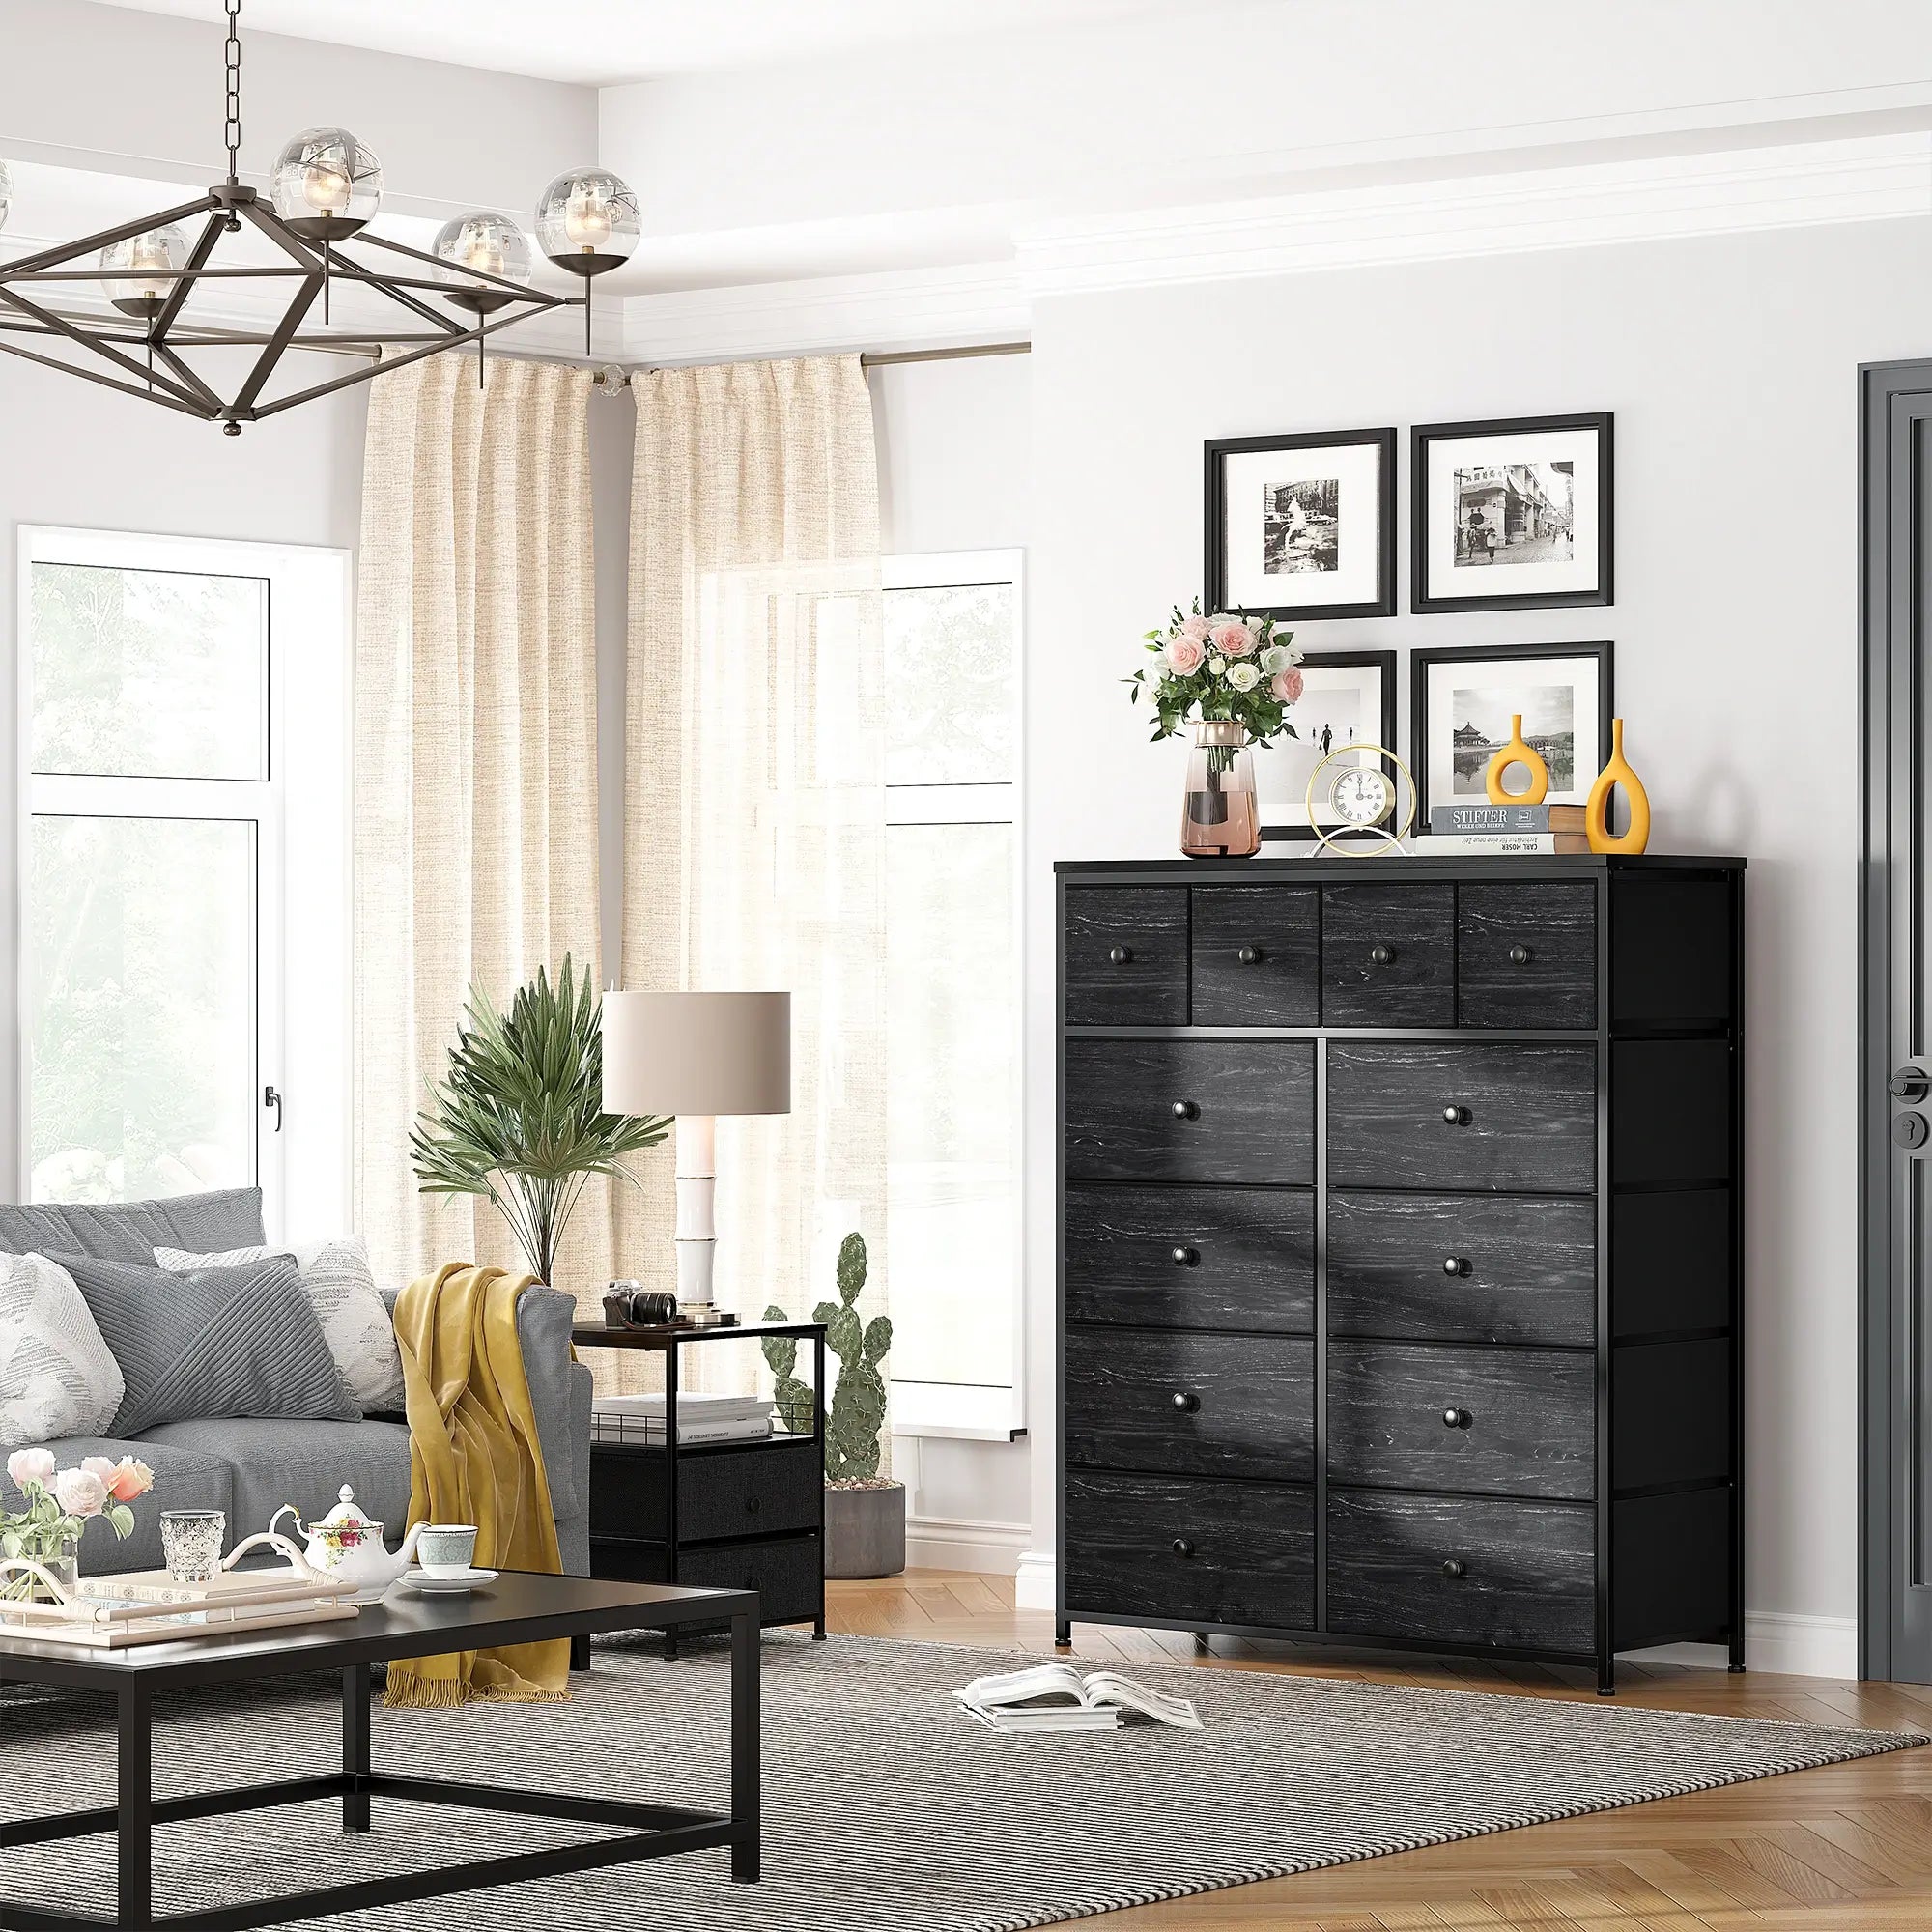 Enhomee Black Bedroom Dresser with 12 Drawers, Chest of Drawers For Bedroom